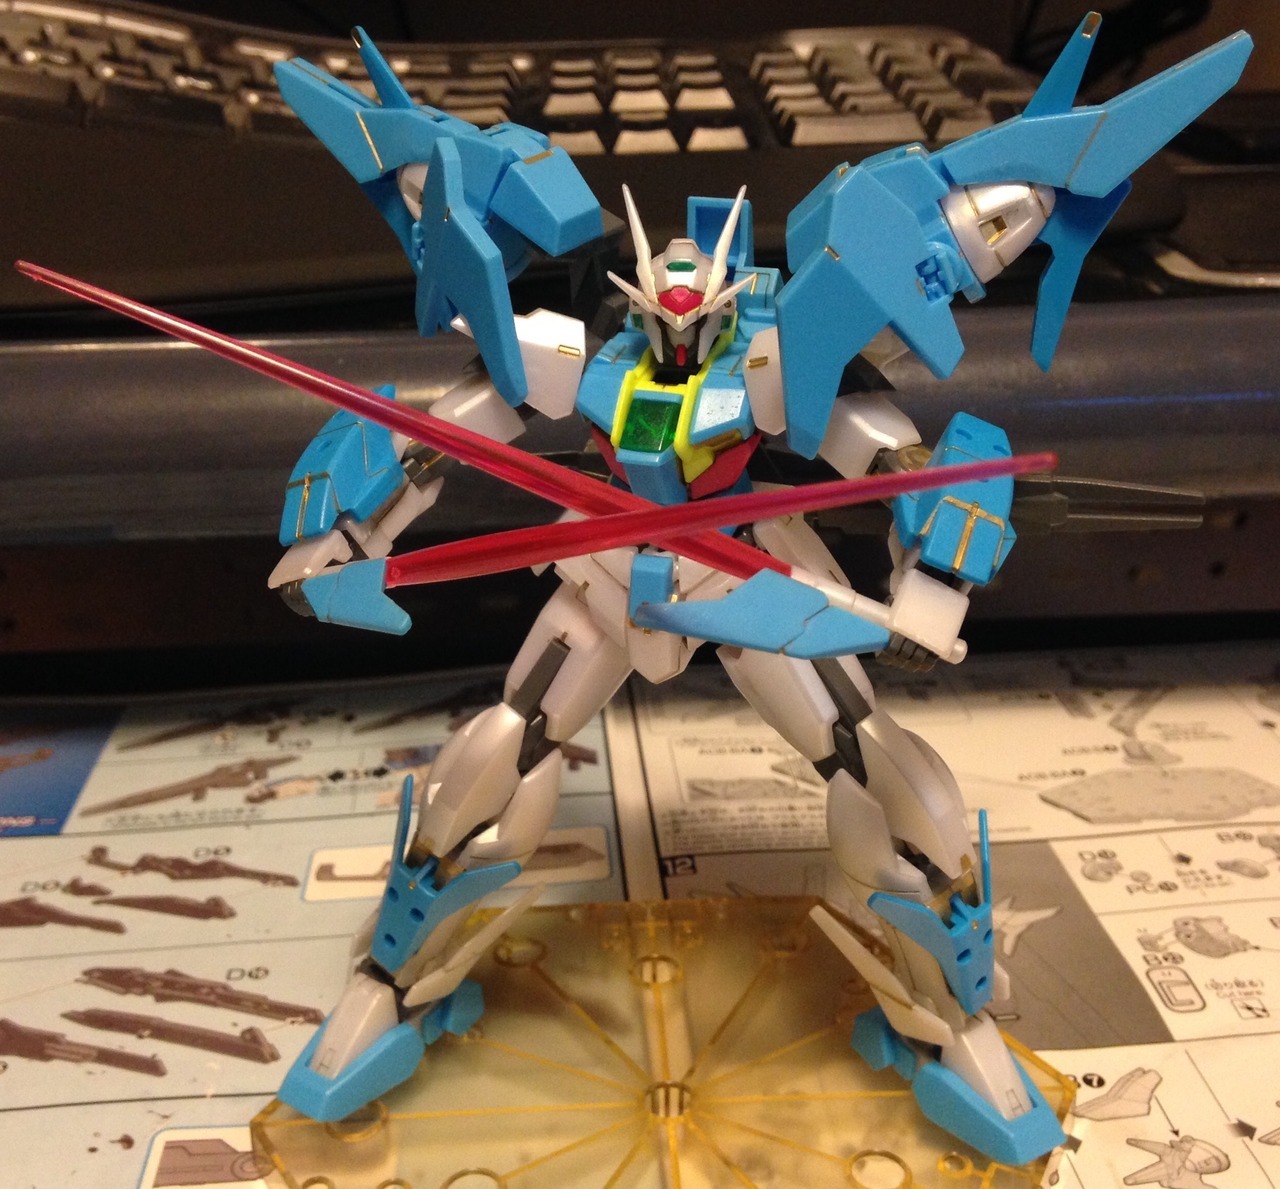 Rm S Toy Review Blog Gn 0000dvr S Gundam 00 Sky Higher Than Sky Phase